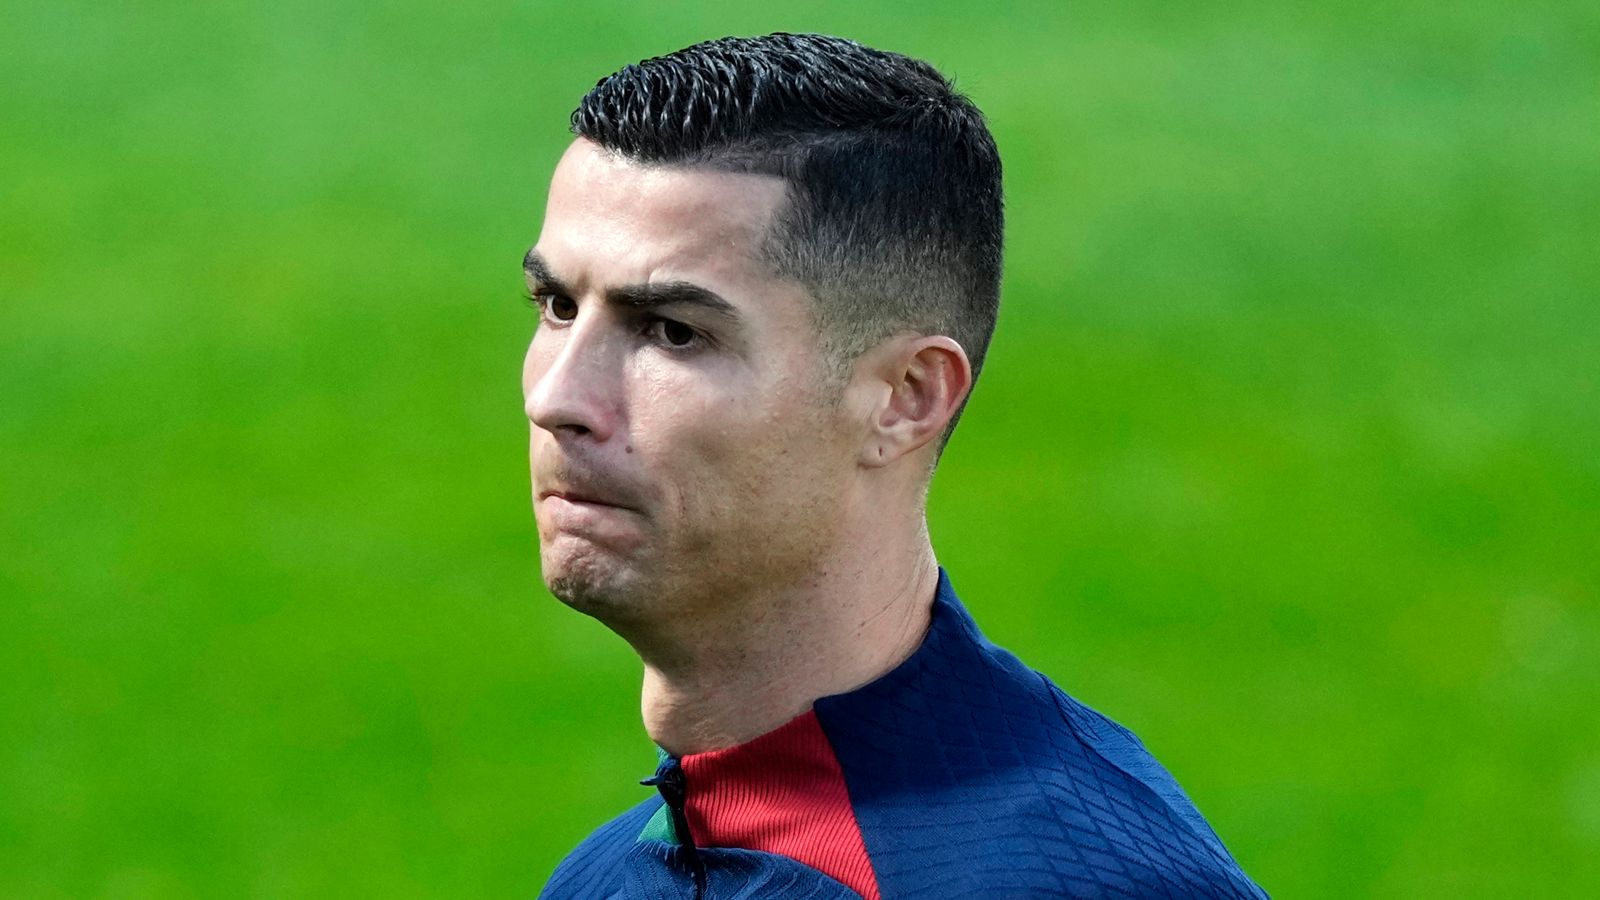 Cristiano Ronaldo: FA suspends and fines former Manchester United star after he 'slapped' mobile phone out of boy's hand